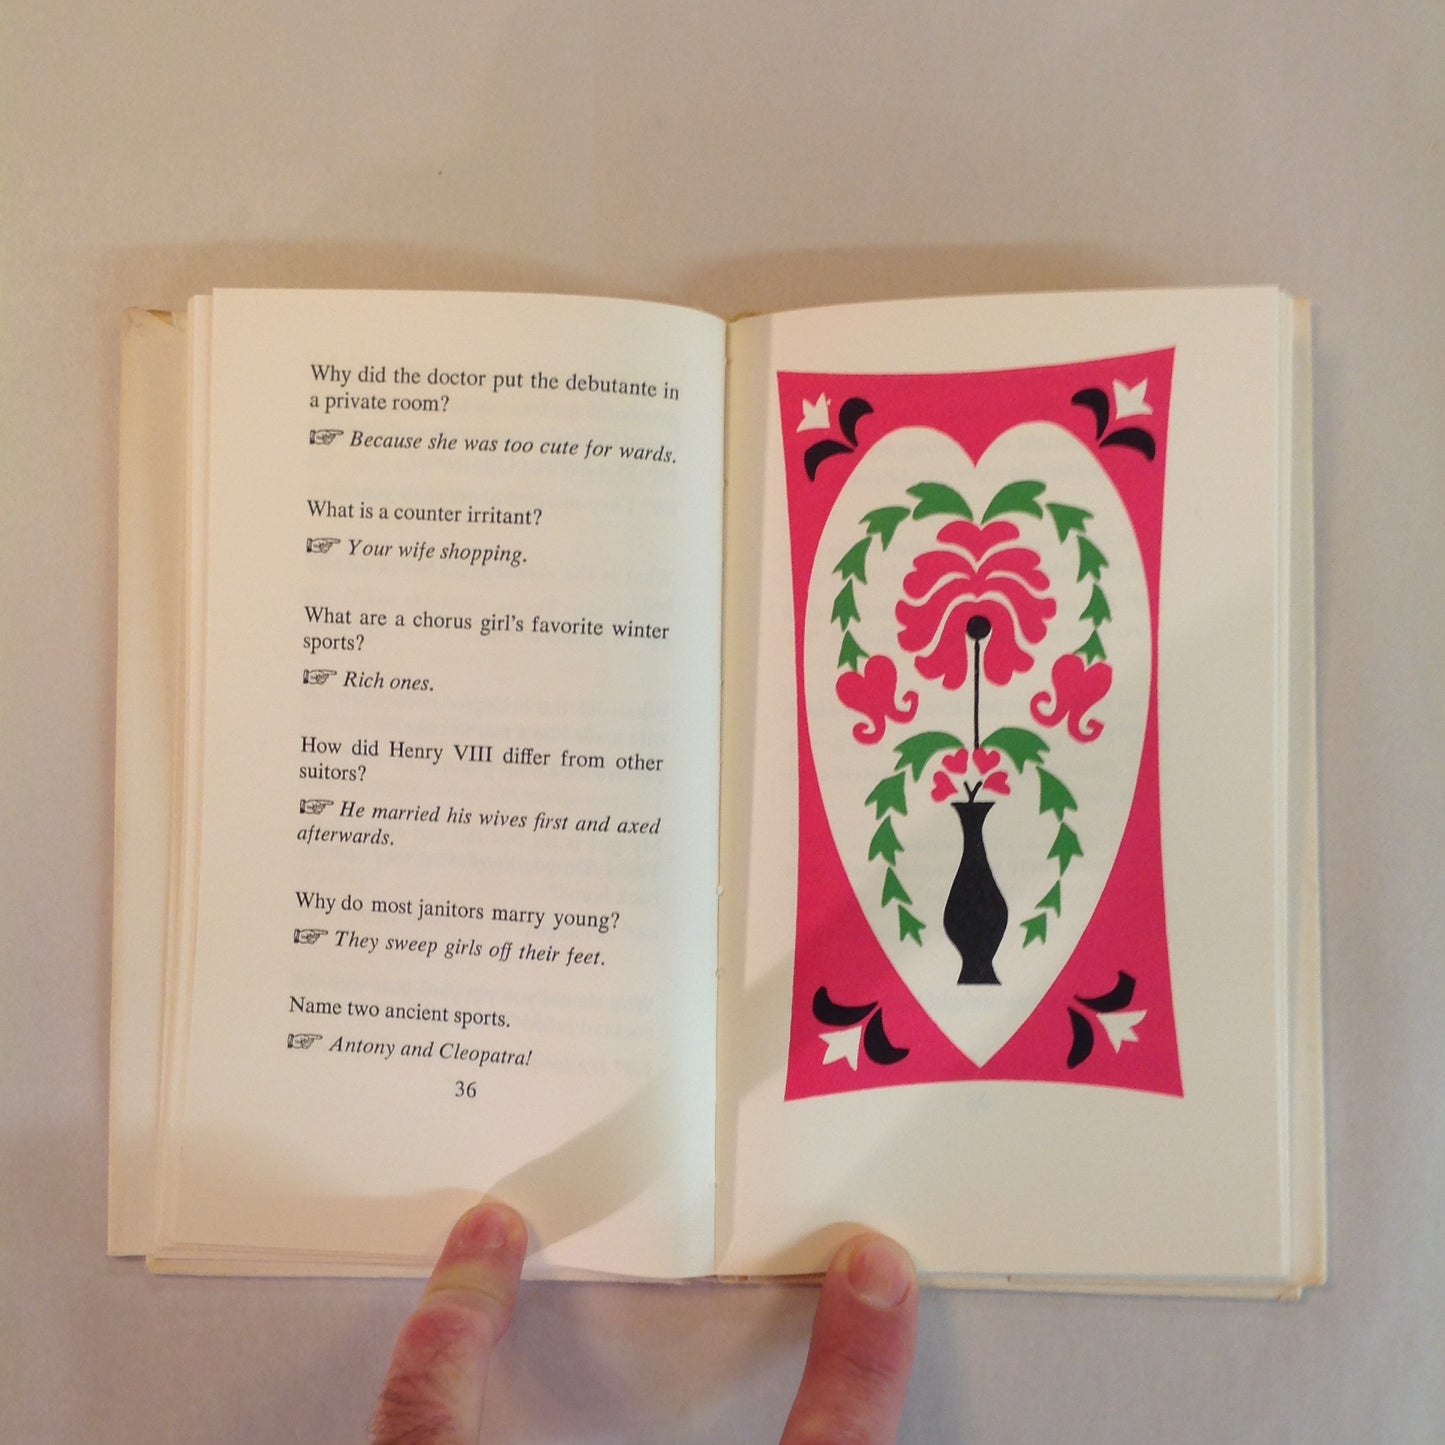 Vintage 1964 Hardcover Gift Book Love Is a Riddle Peter Pauper Press